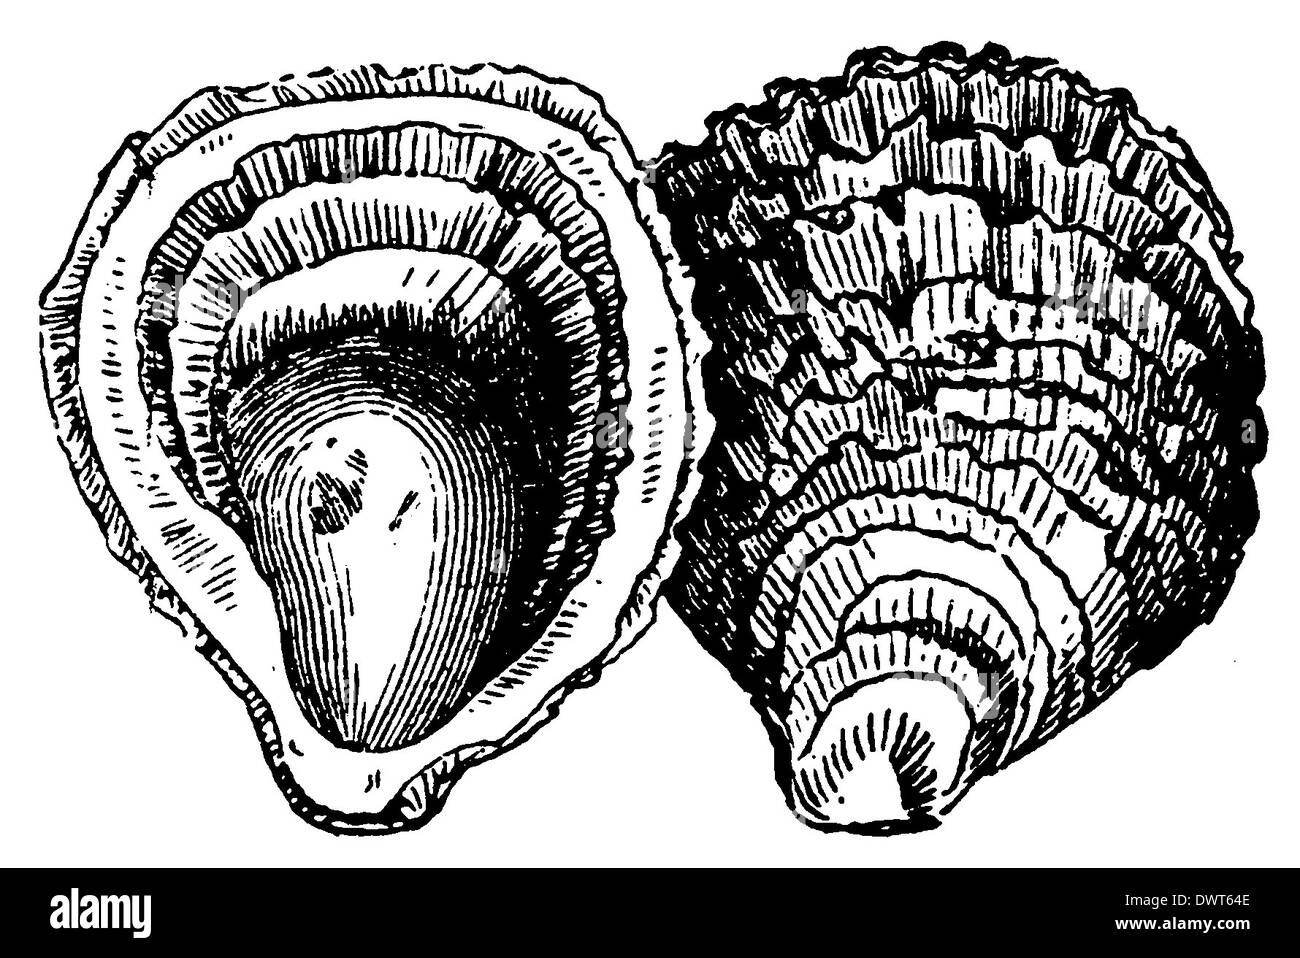 Drawing Oyster Stock Photos & Drawing Oyster Stock Images - Alamy